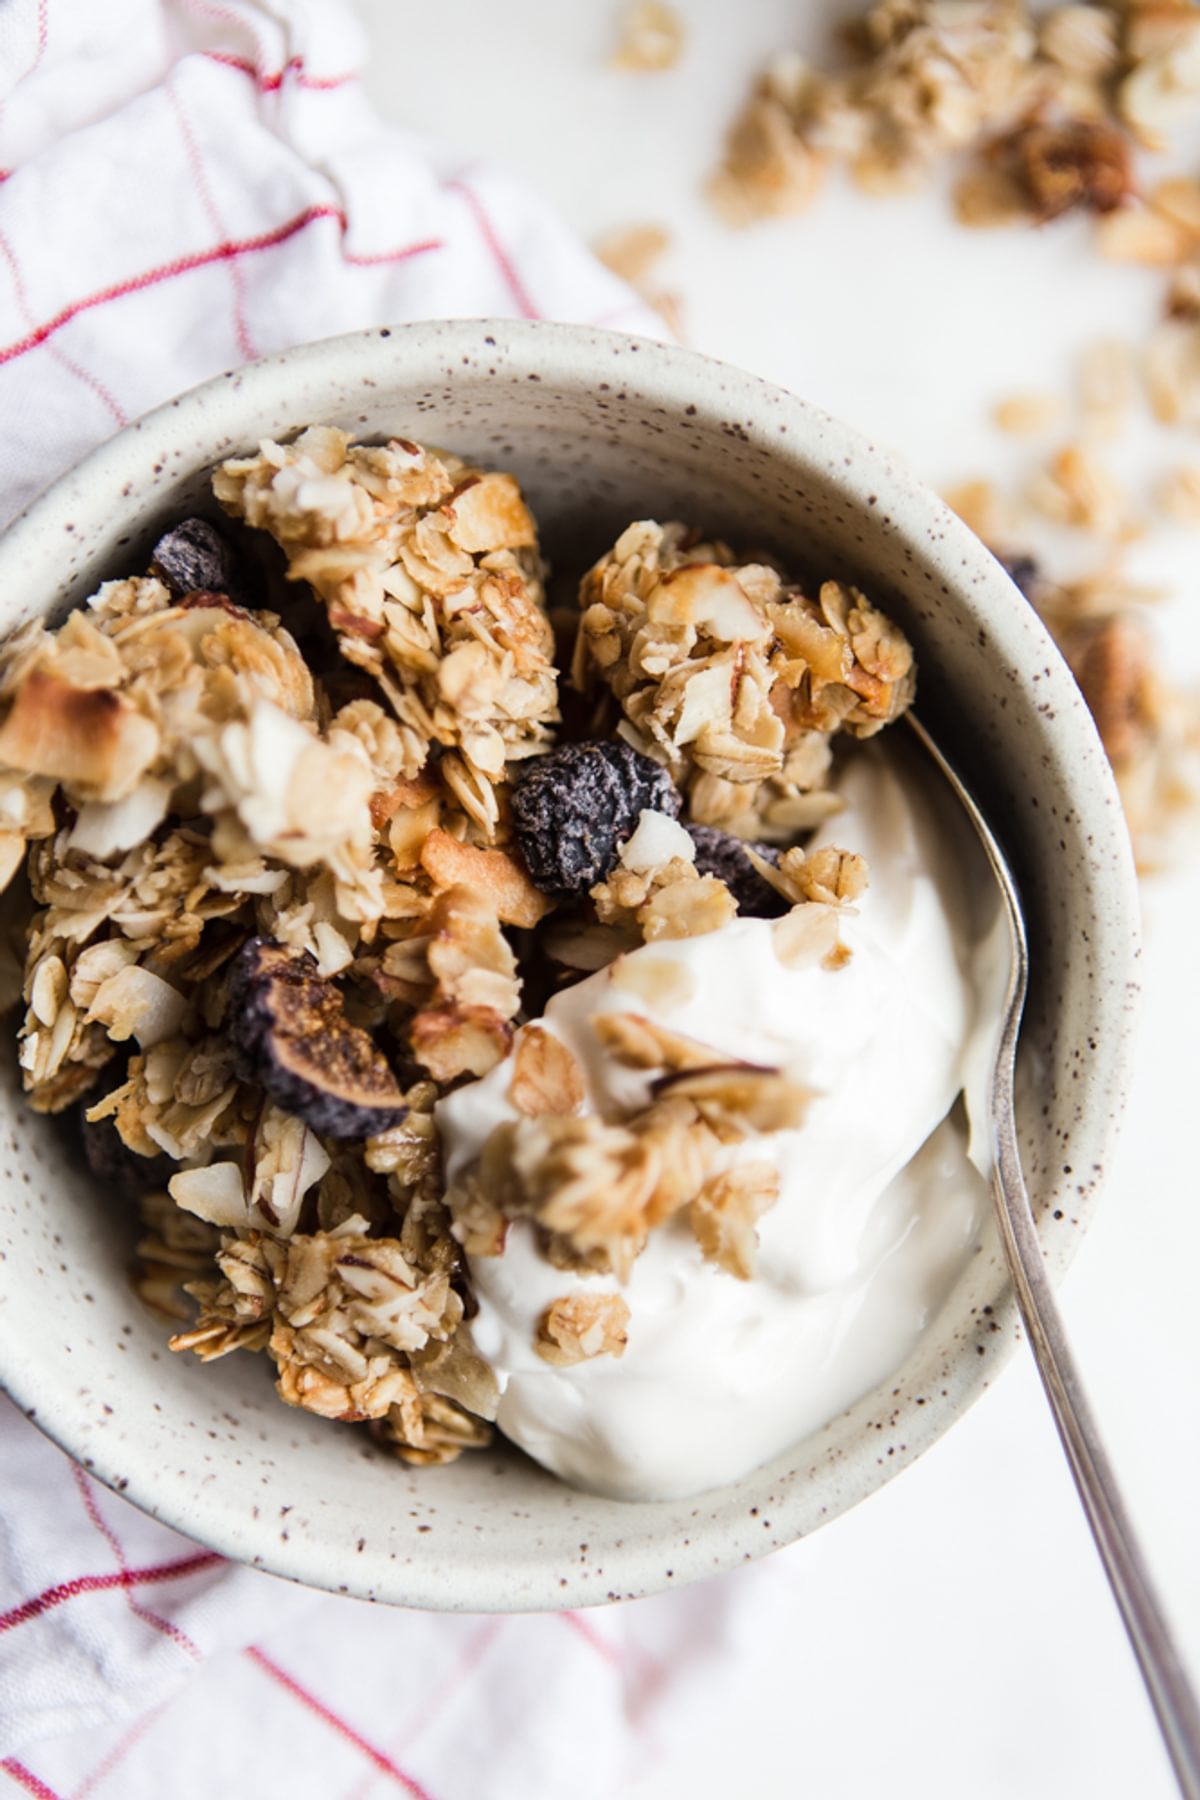 homemade vanilla Granola with Figs, Almonds and Coconut with yogurt